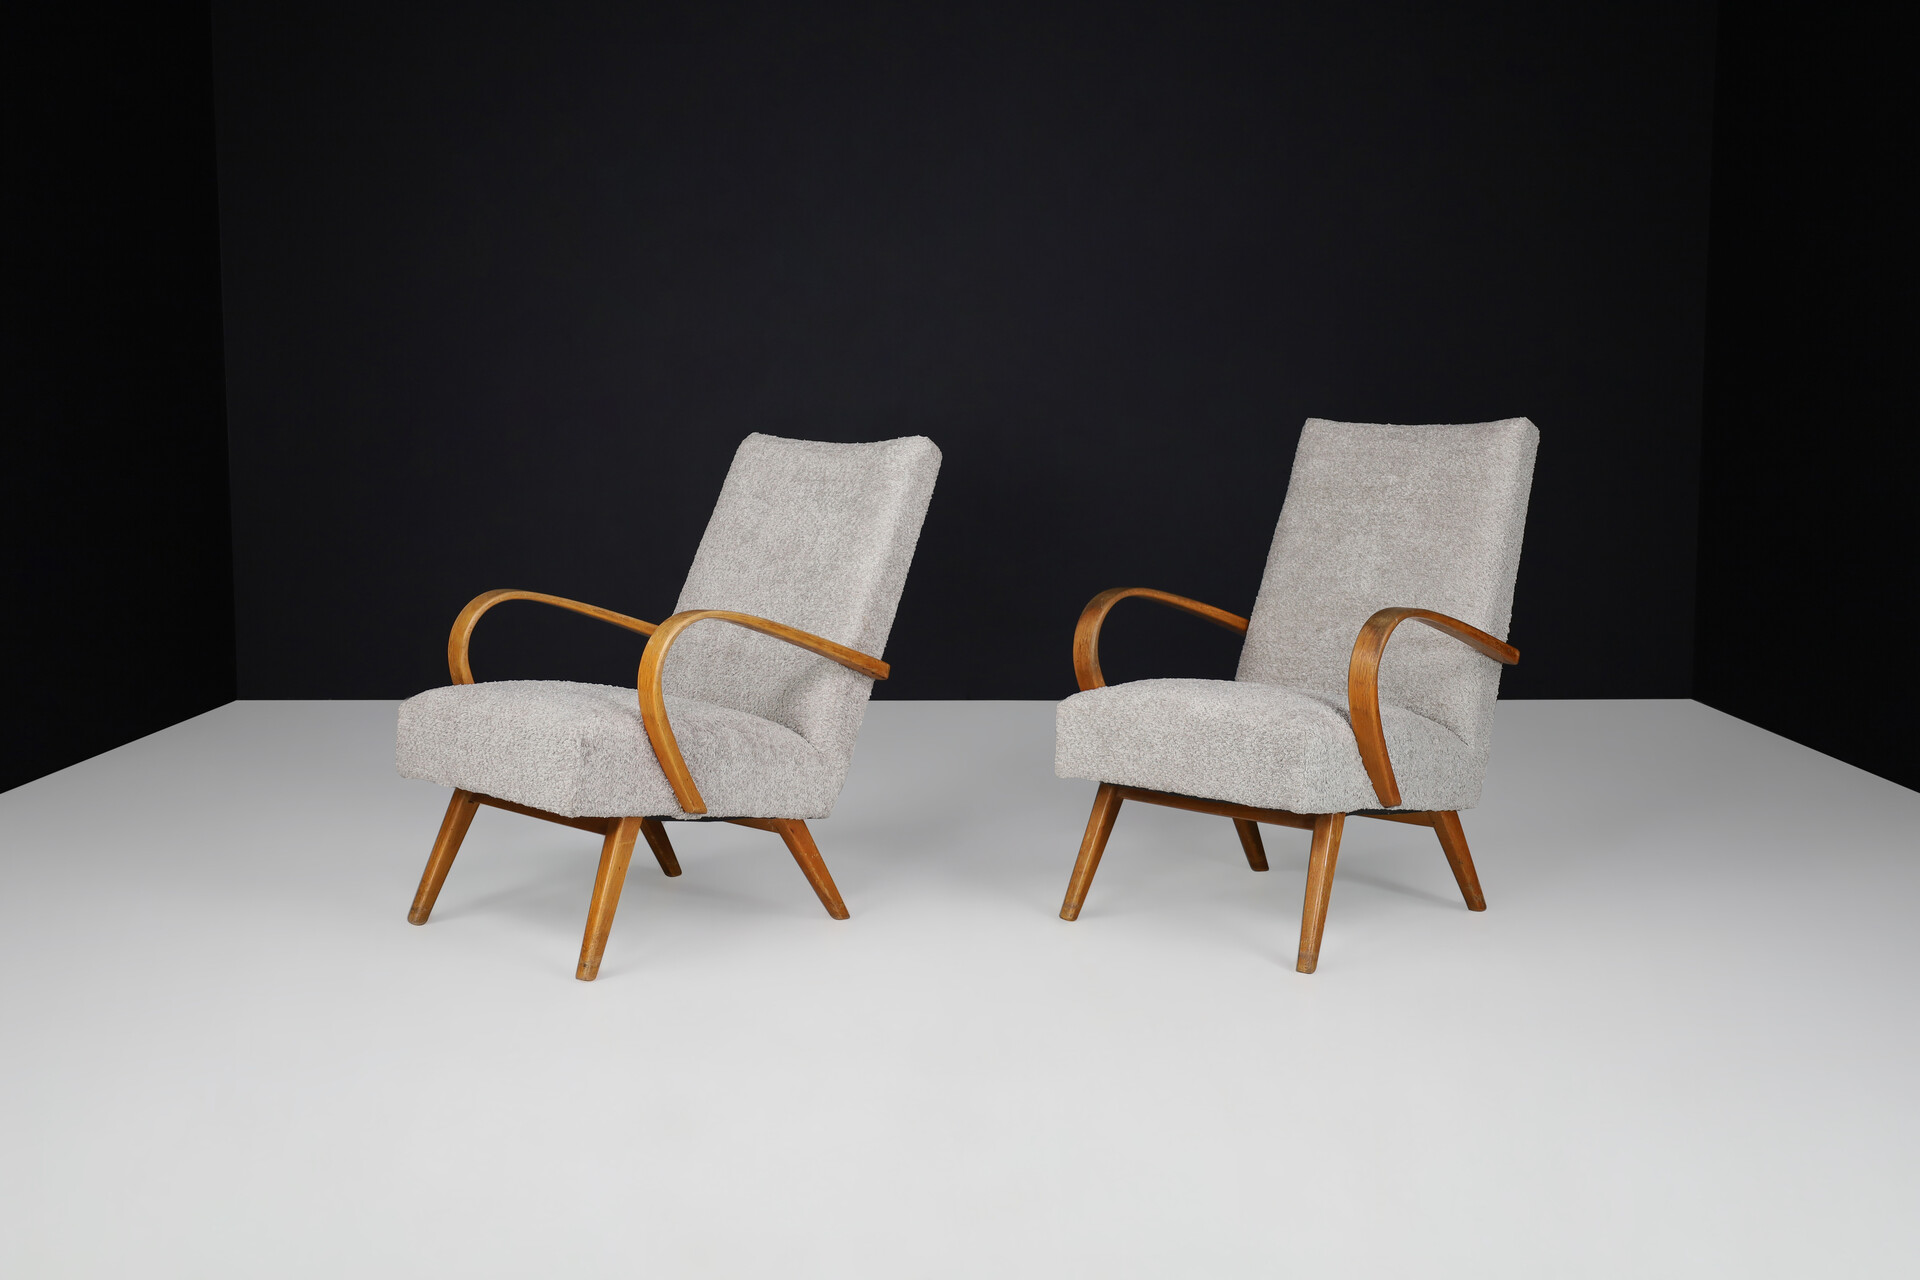 Mid century modern Bentwood Arm Chairs / Lounge Chairs With New Upholstered Bouclé Fabric, Praque 1950s Mid-20th century